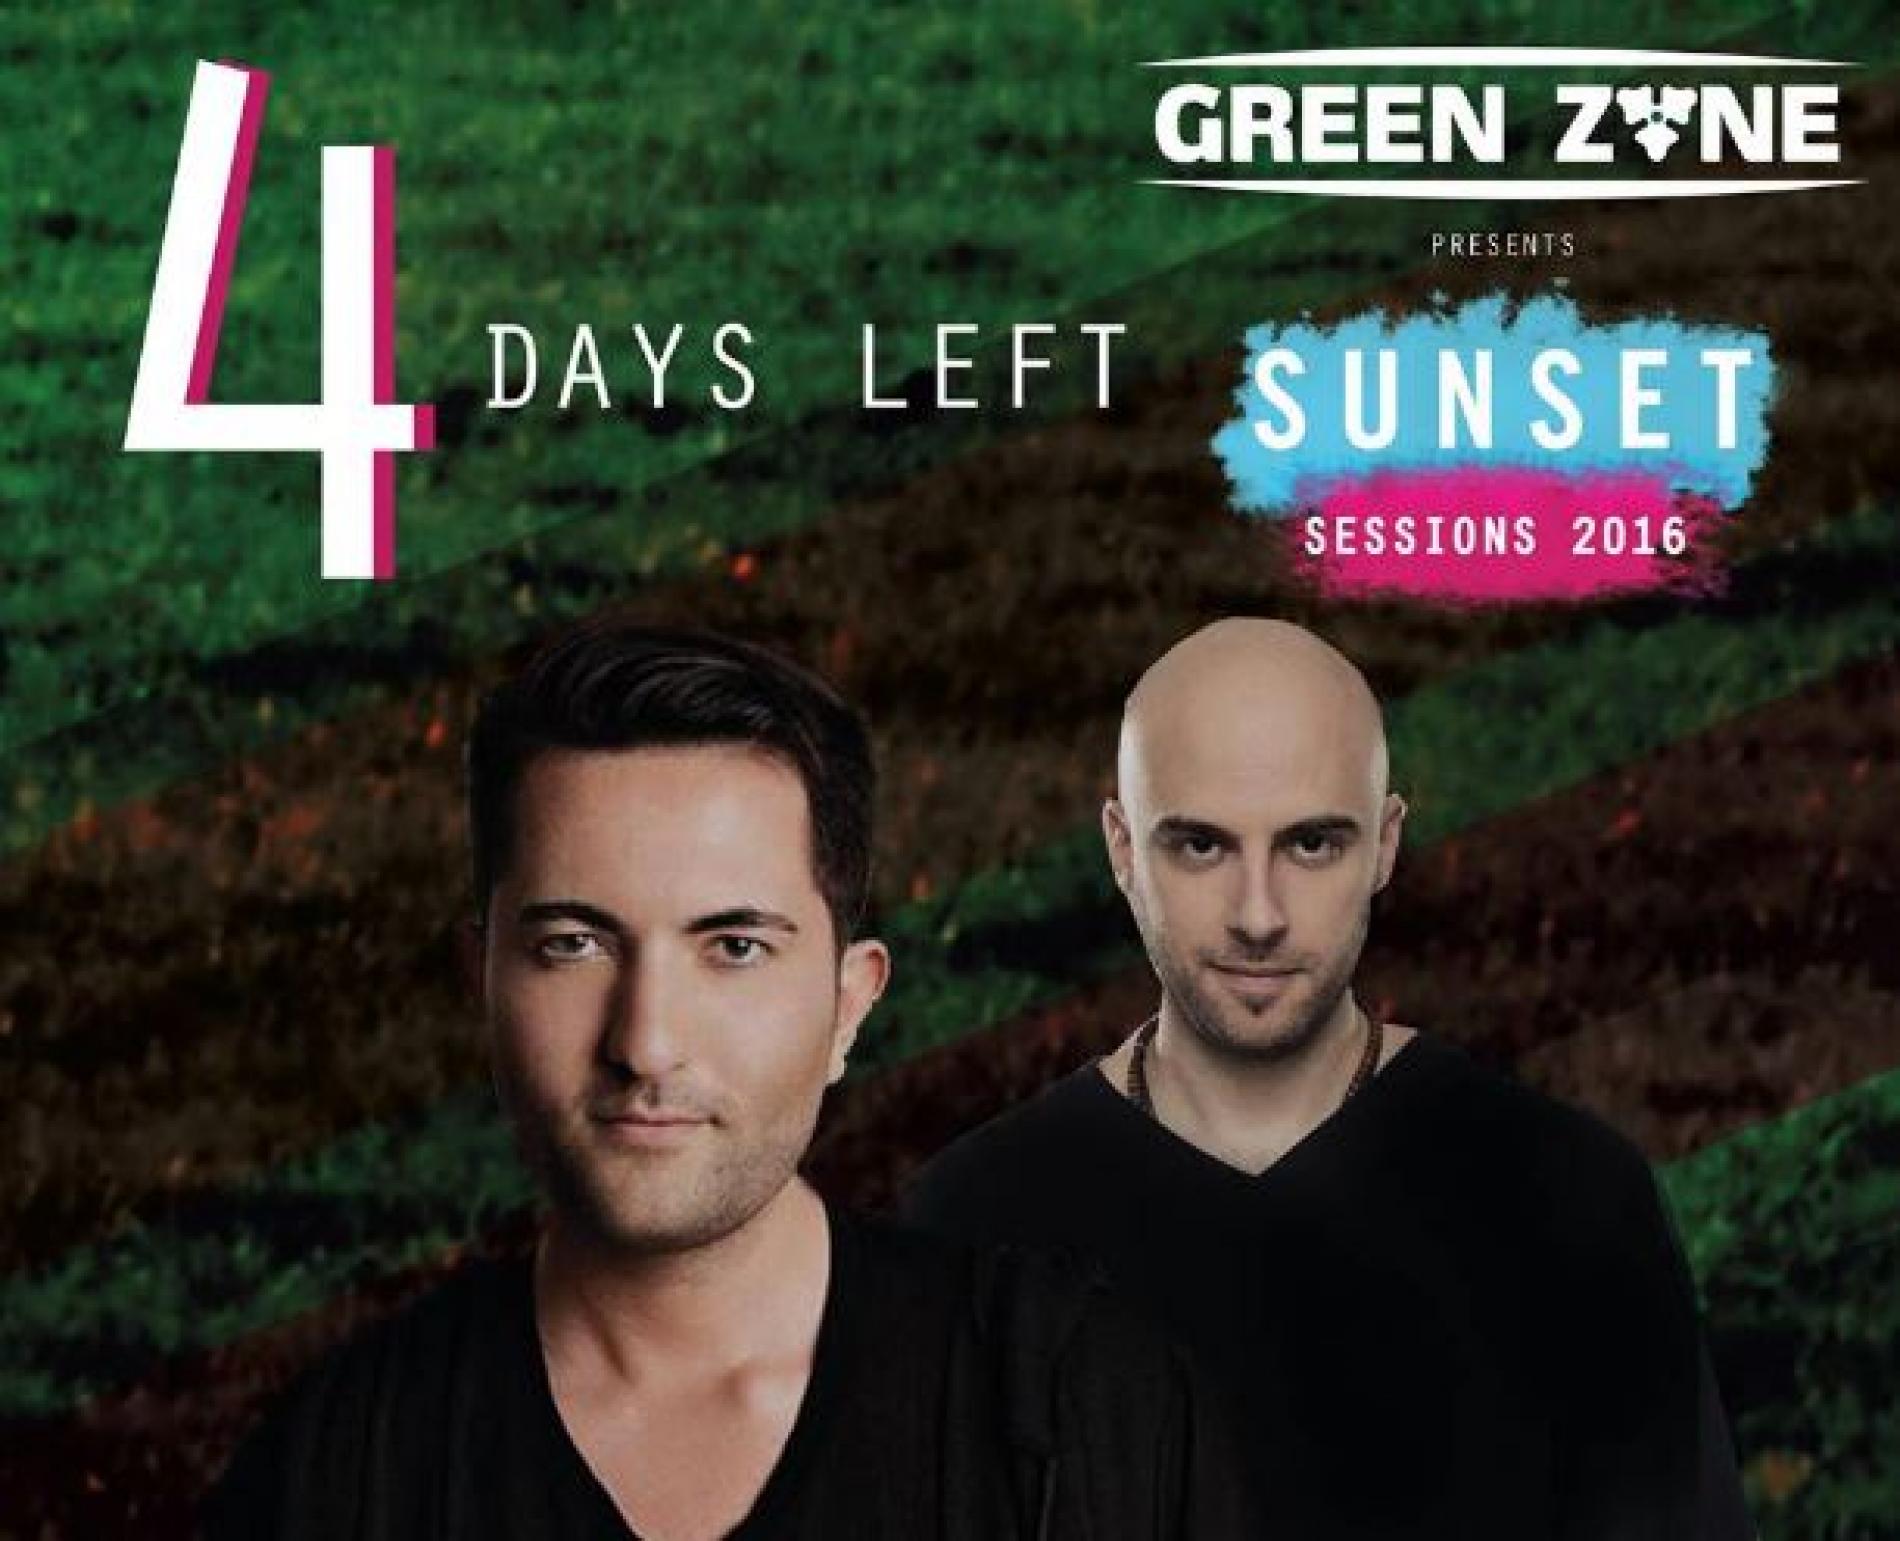 4 Days More For The Sunset Sessions 2016